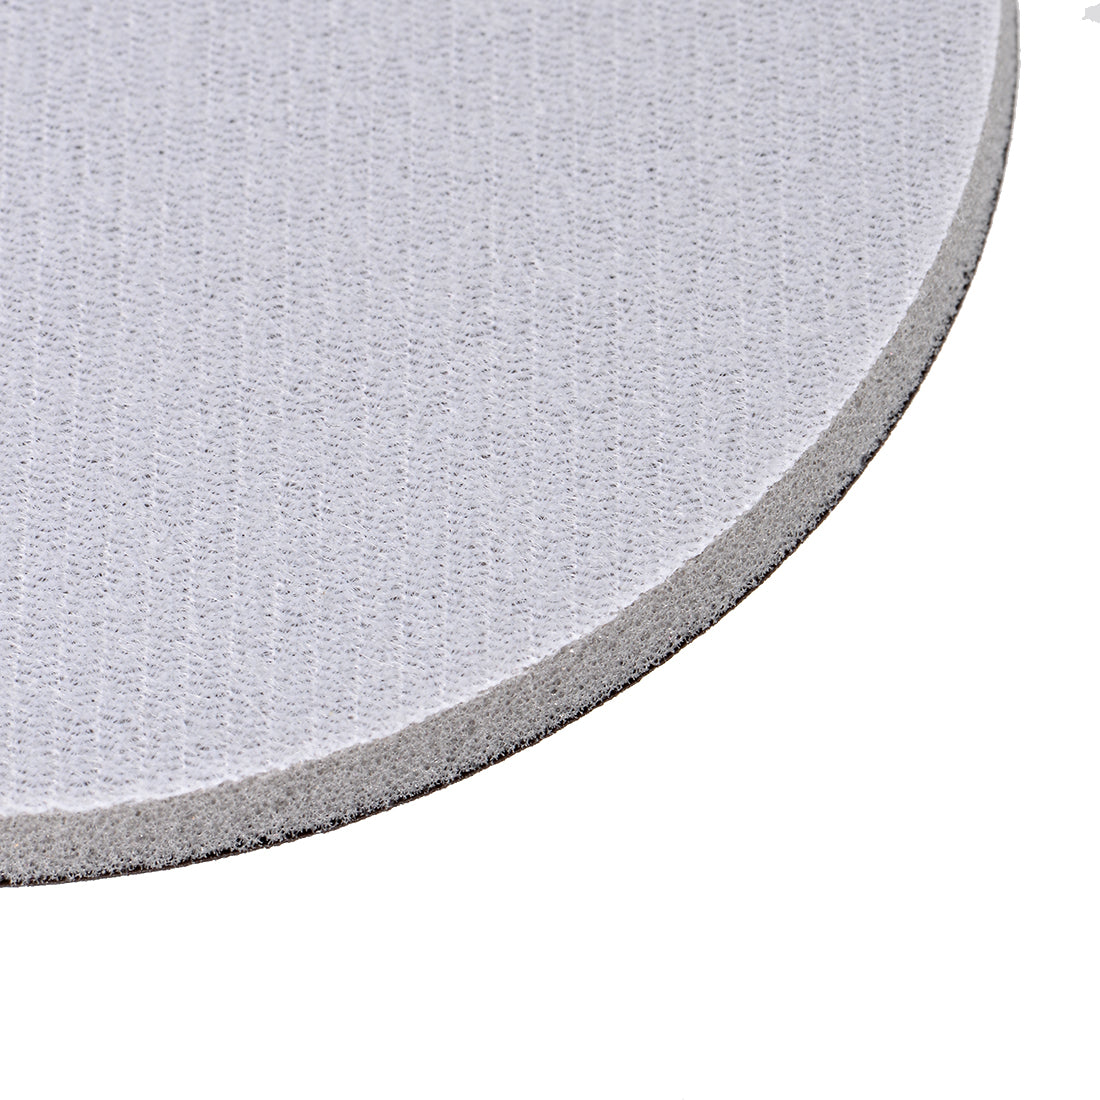 uxcell Uxcell 4-Inch 400-Grits Hook and Loop Sanding Disc, Sponge Sanding Pad Wet Dry Aluminum Oxide Sandpaper for Polishing & Grinding 5pcs